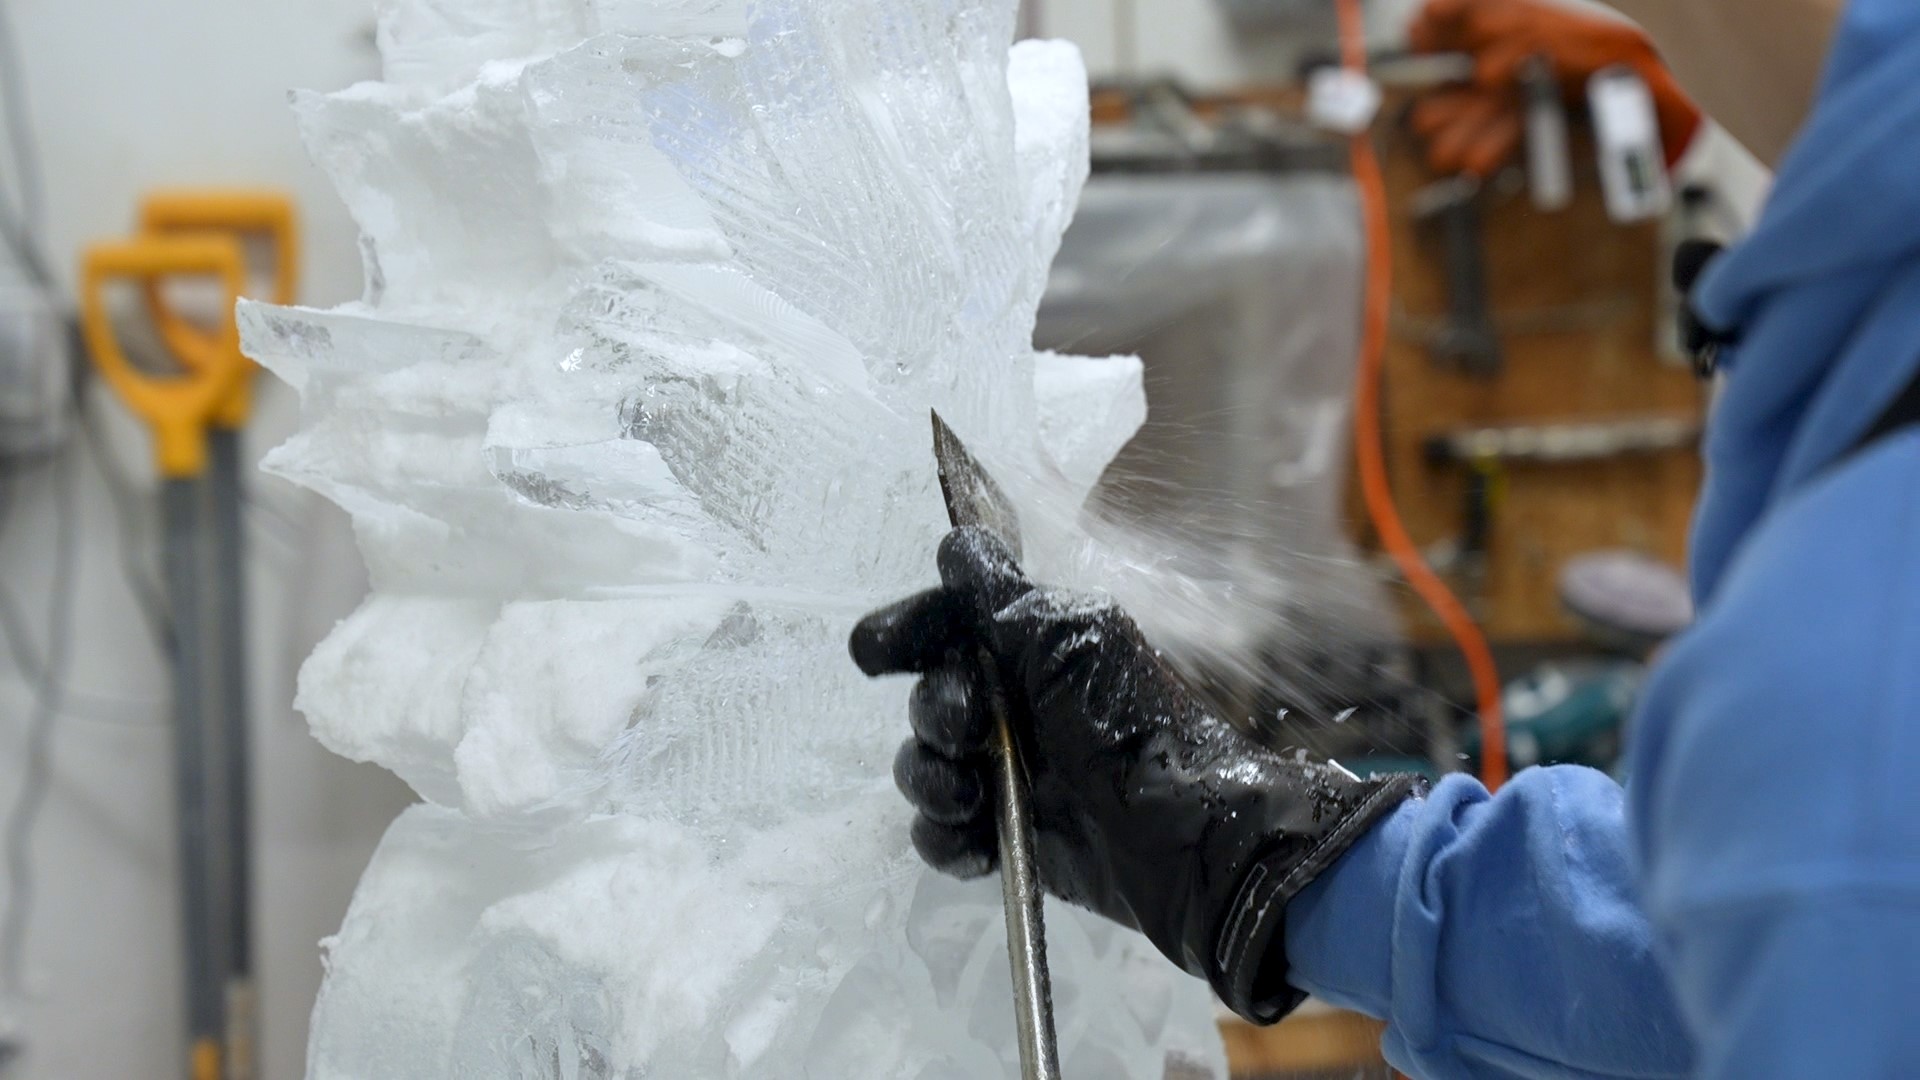 Freezer to festival:  60,000 pounds of ice sculpted for Frederick